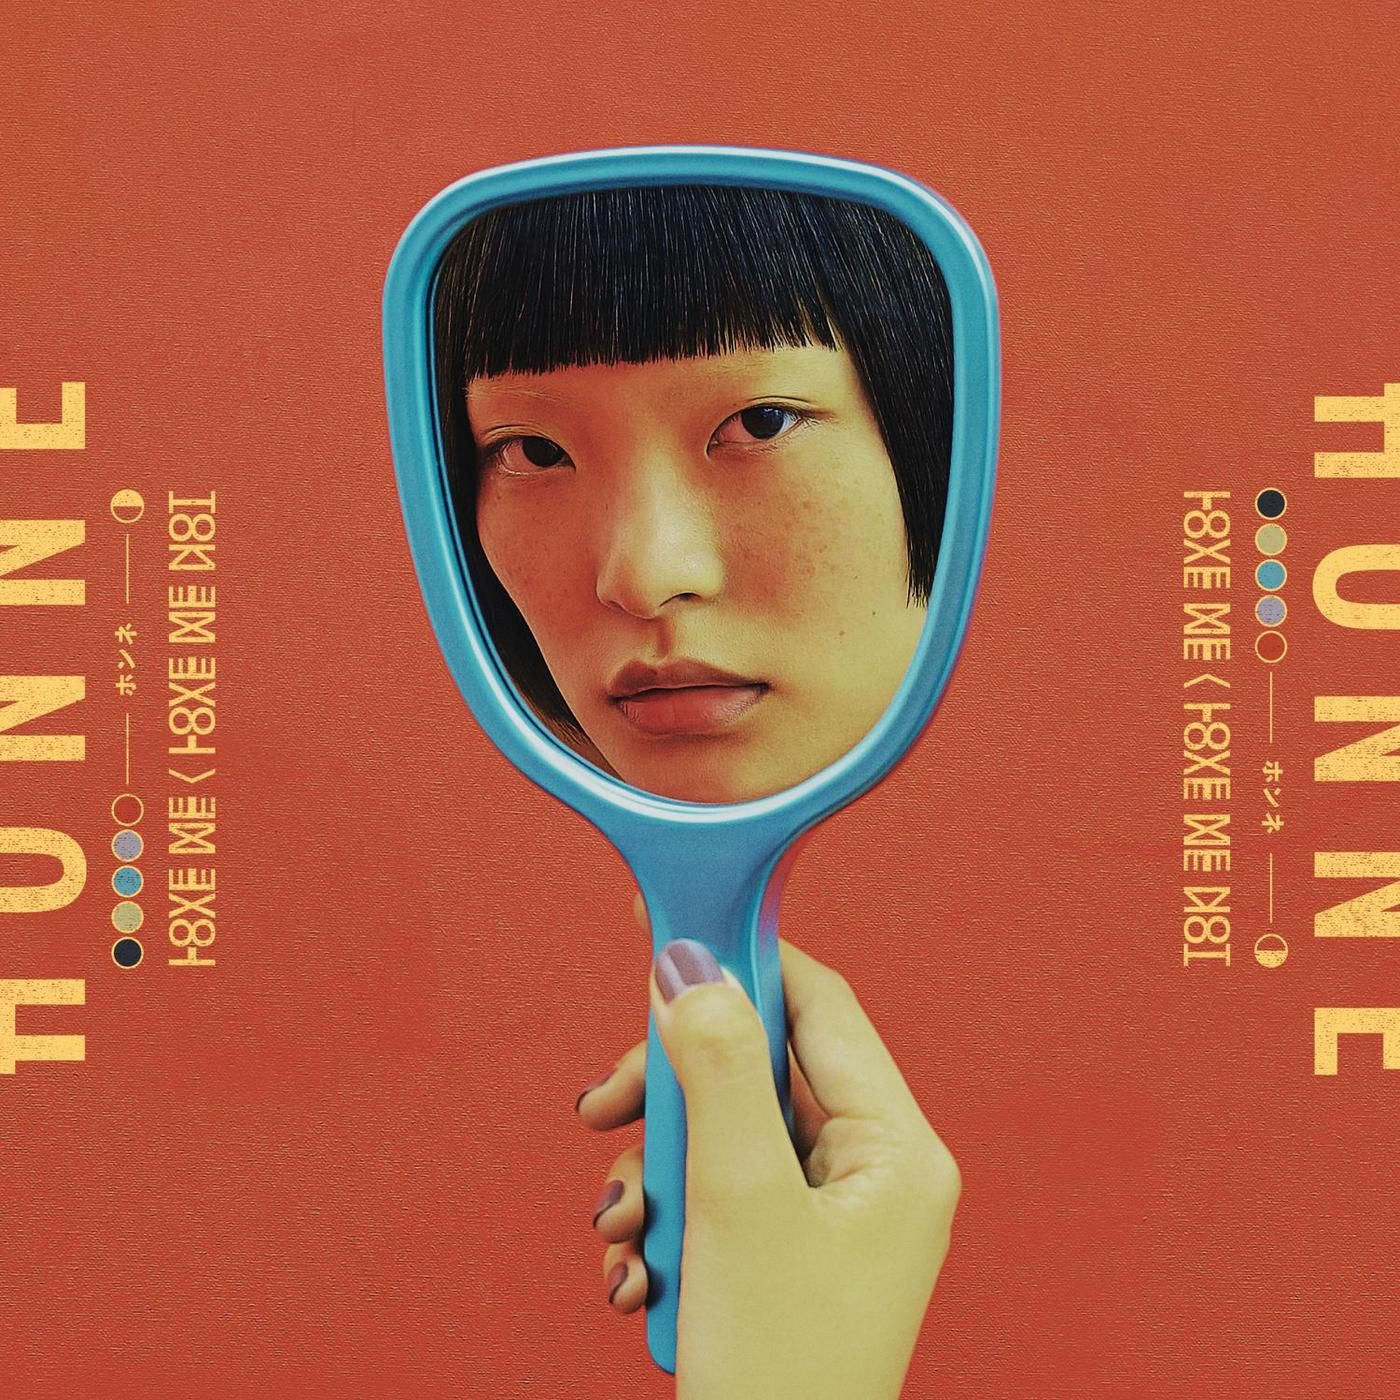 HONNE - Crying Over You ◐ (Feat. BEKA) (신비, 활기, 비트)